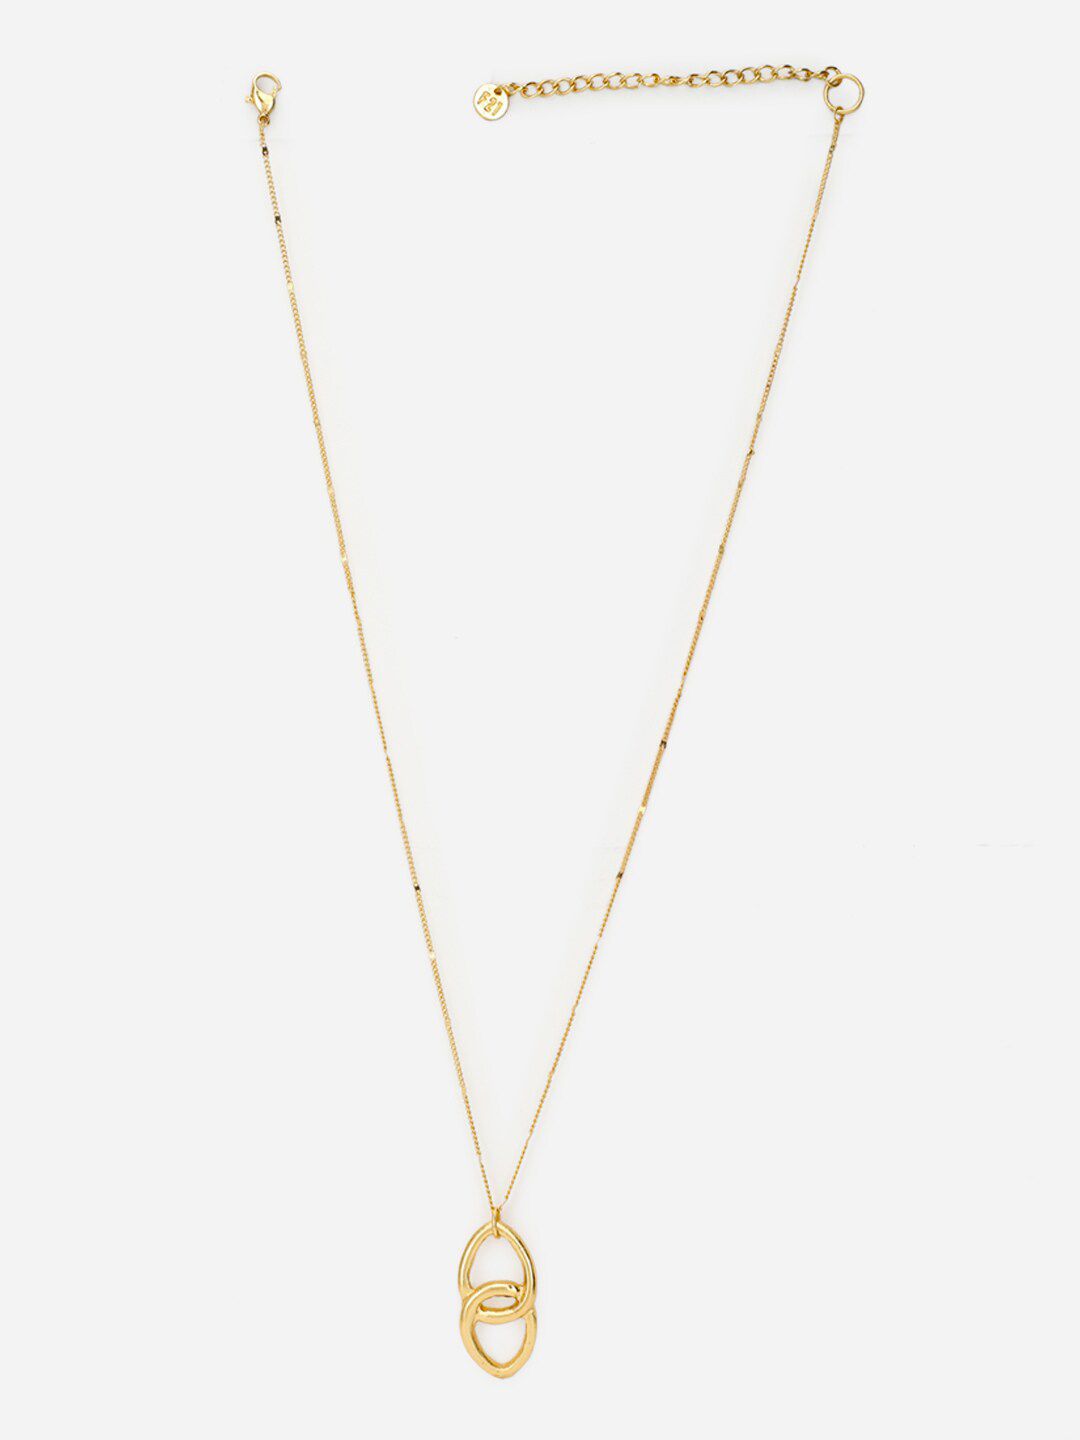 FOREVER 21 Gold-Toned Necklace Price in India